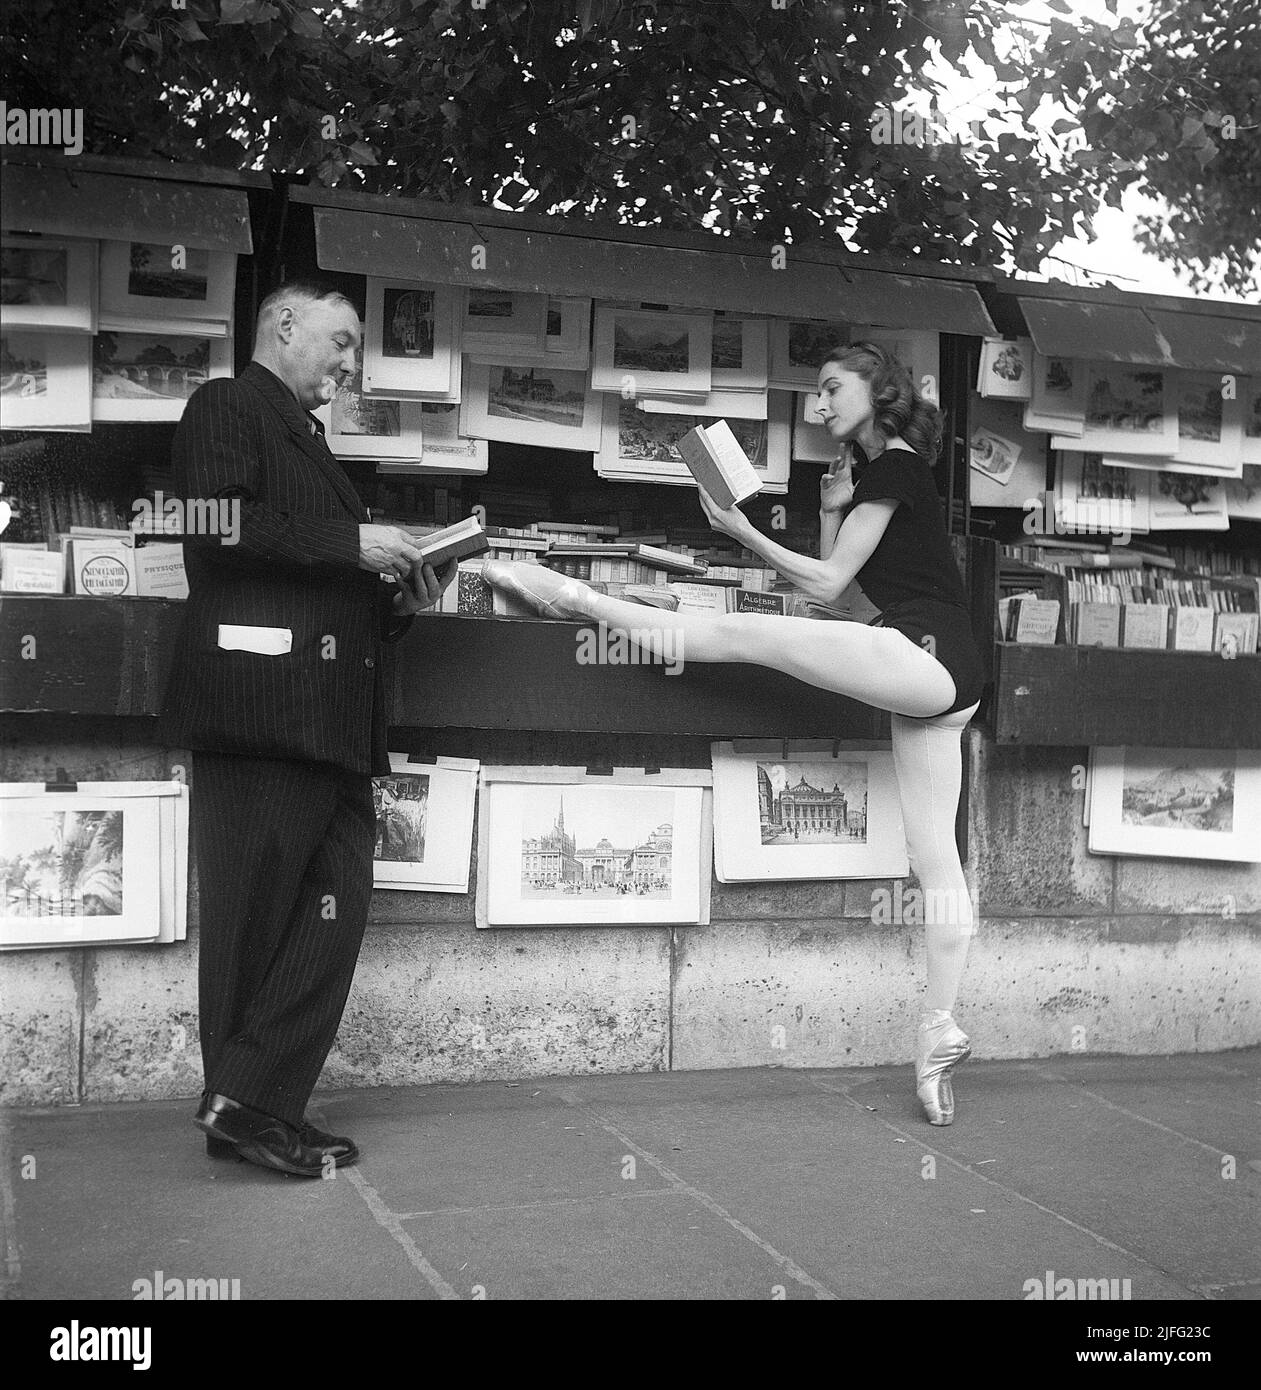 Ballerina in Paris 1952. Ellen Rasch, 1920-2015 pictured in Paris in her dancing outfit standing on one toe reading a book off a street merchants stand. Paris 1952 Kristoffersson ref BD27-5 Stock Photo